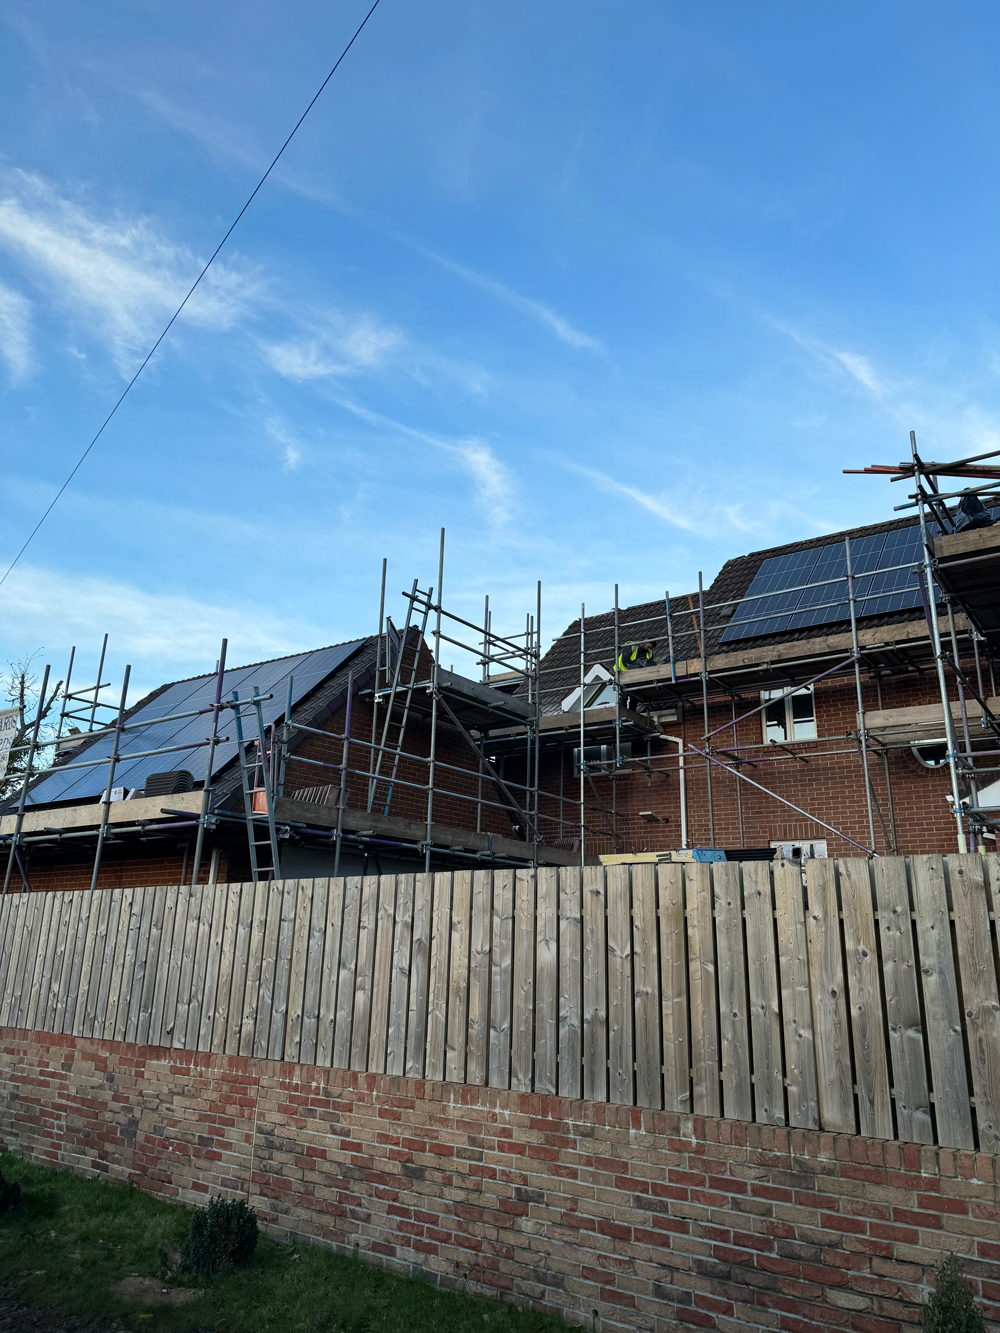 pv solar panels being installed on new house outside with scaffolding